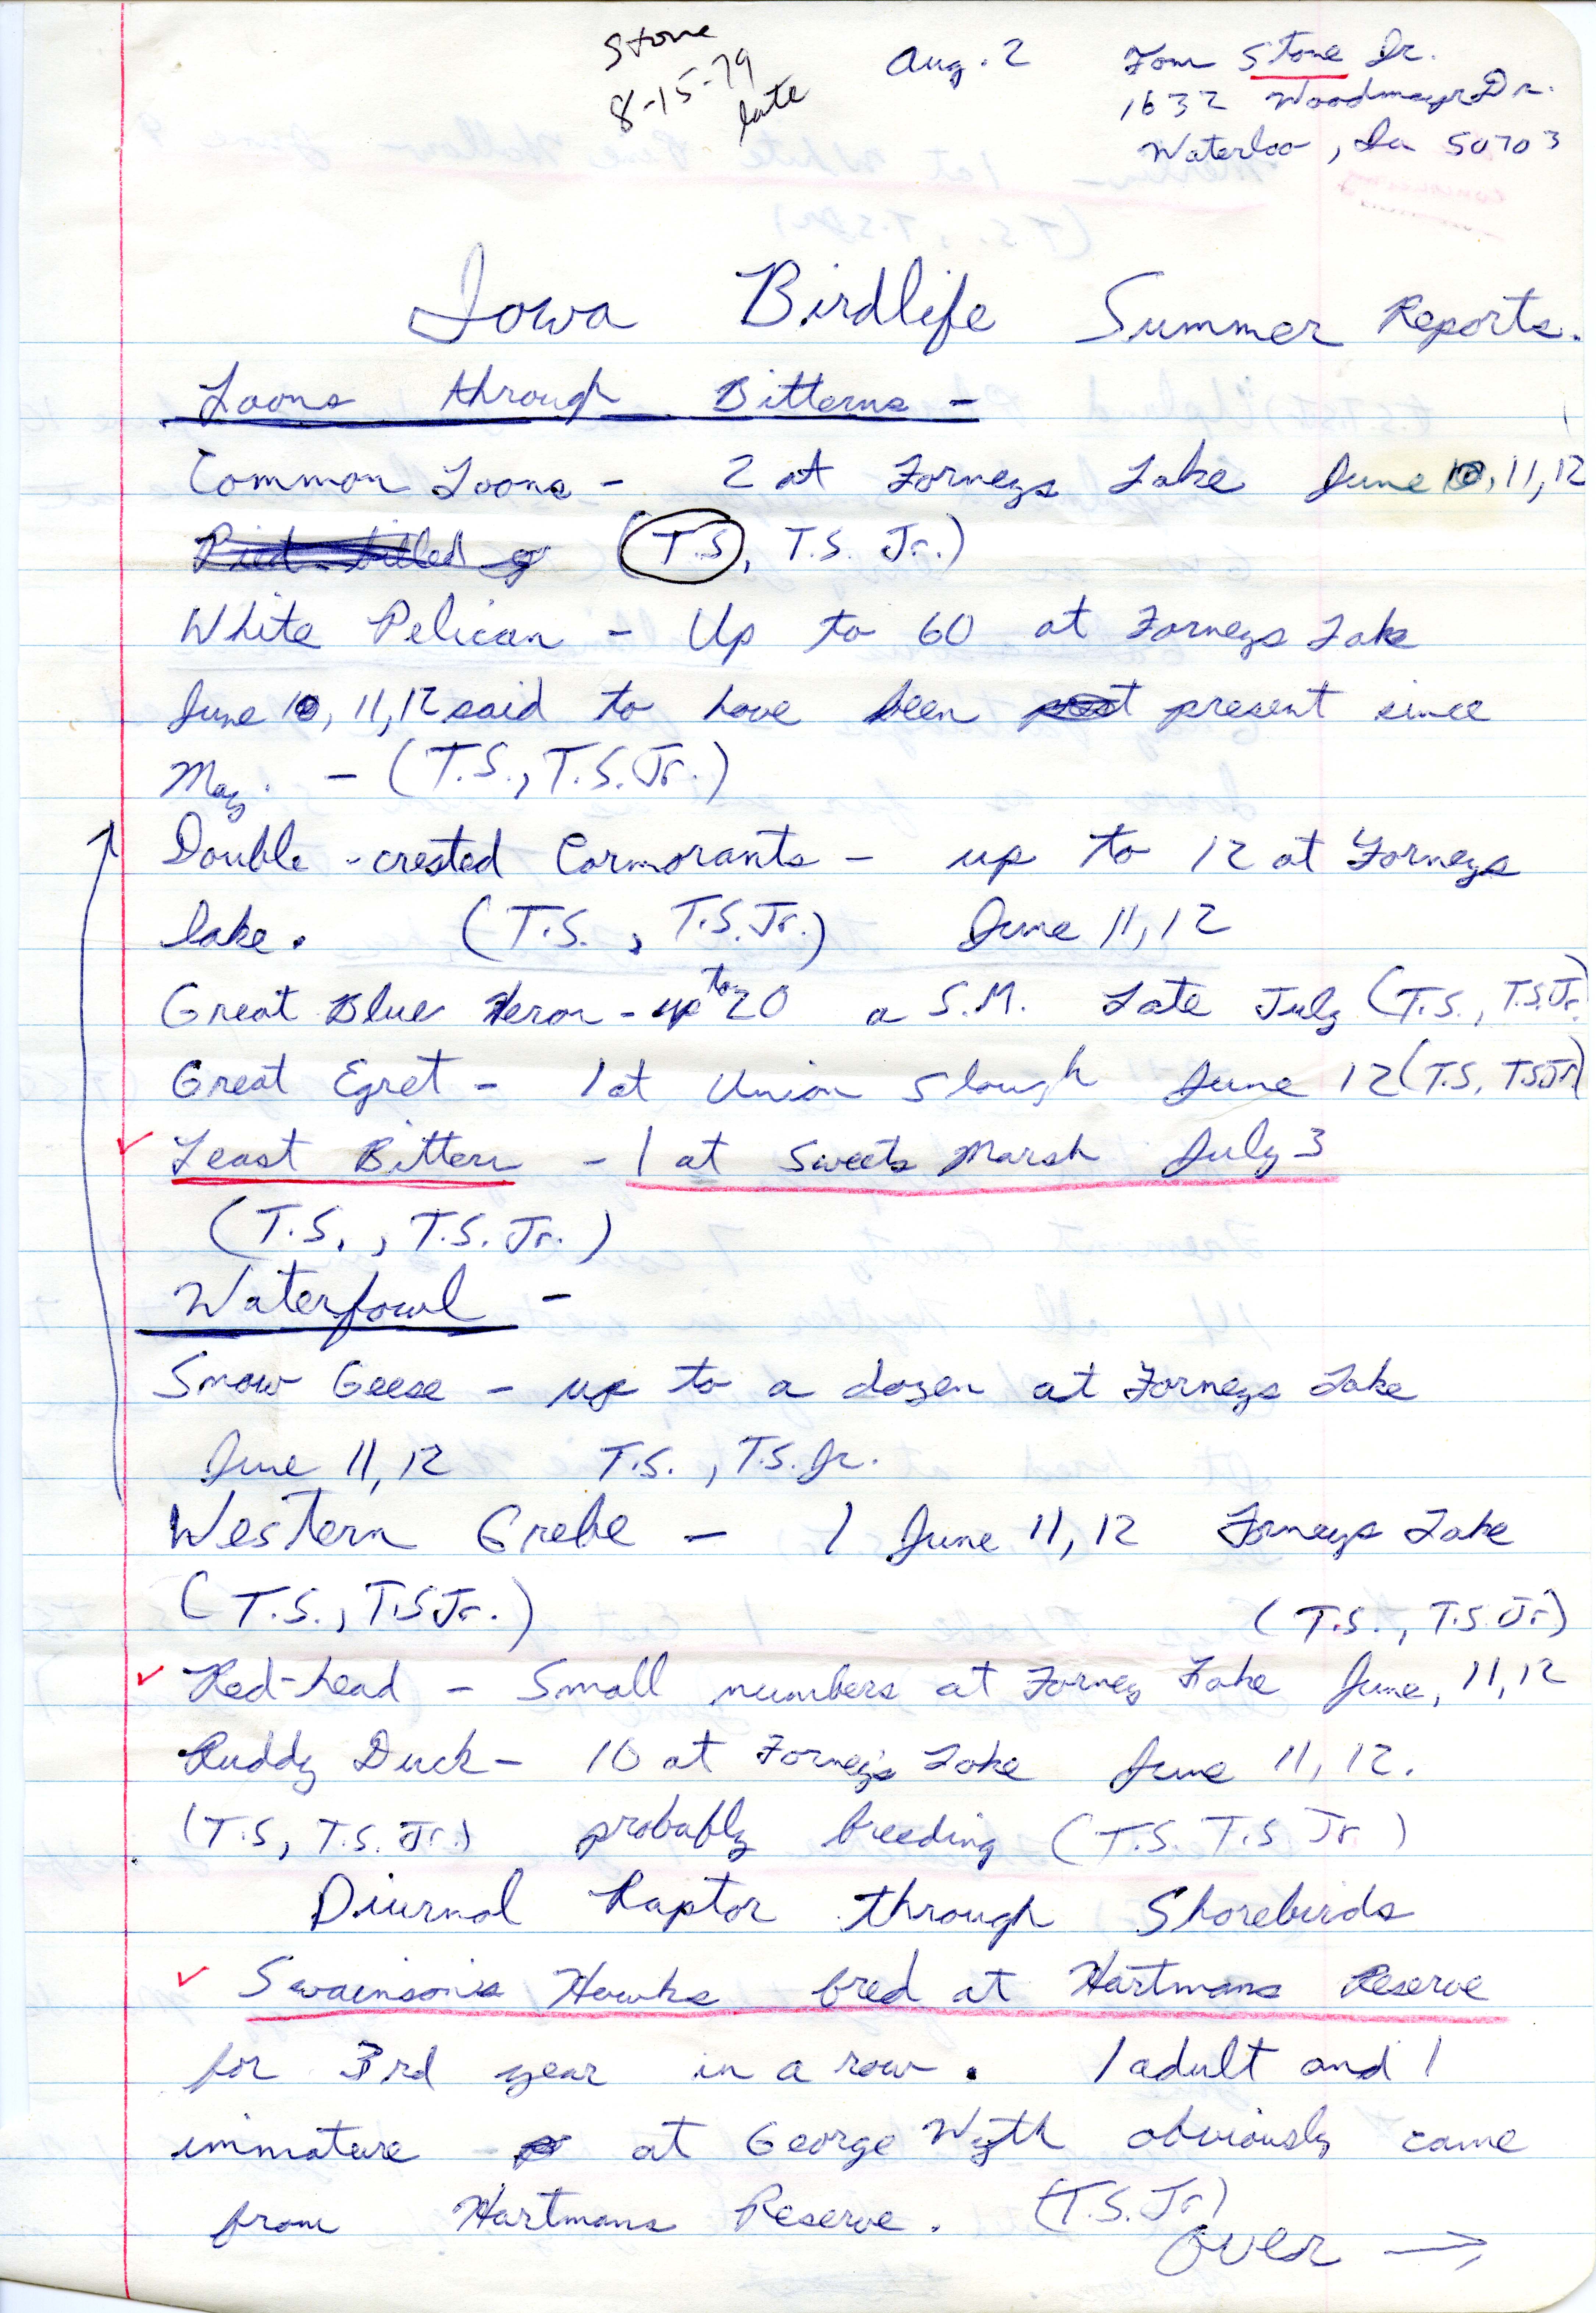 Tom Stone, Jr. field notes with bird sightings, summer 1979